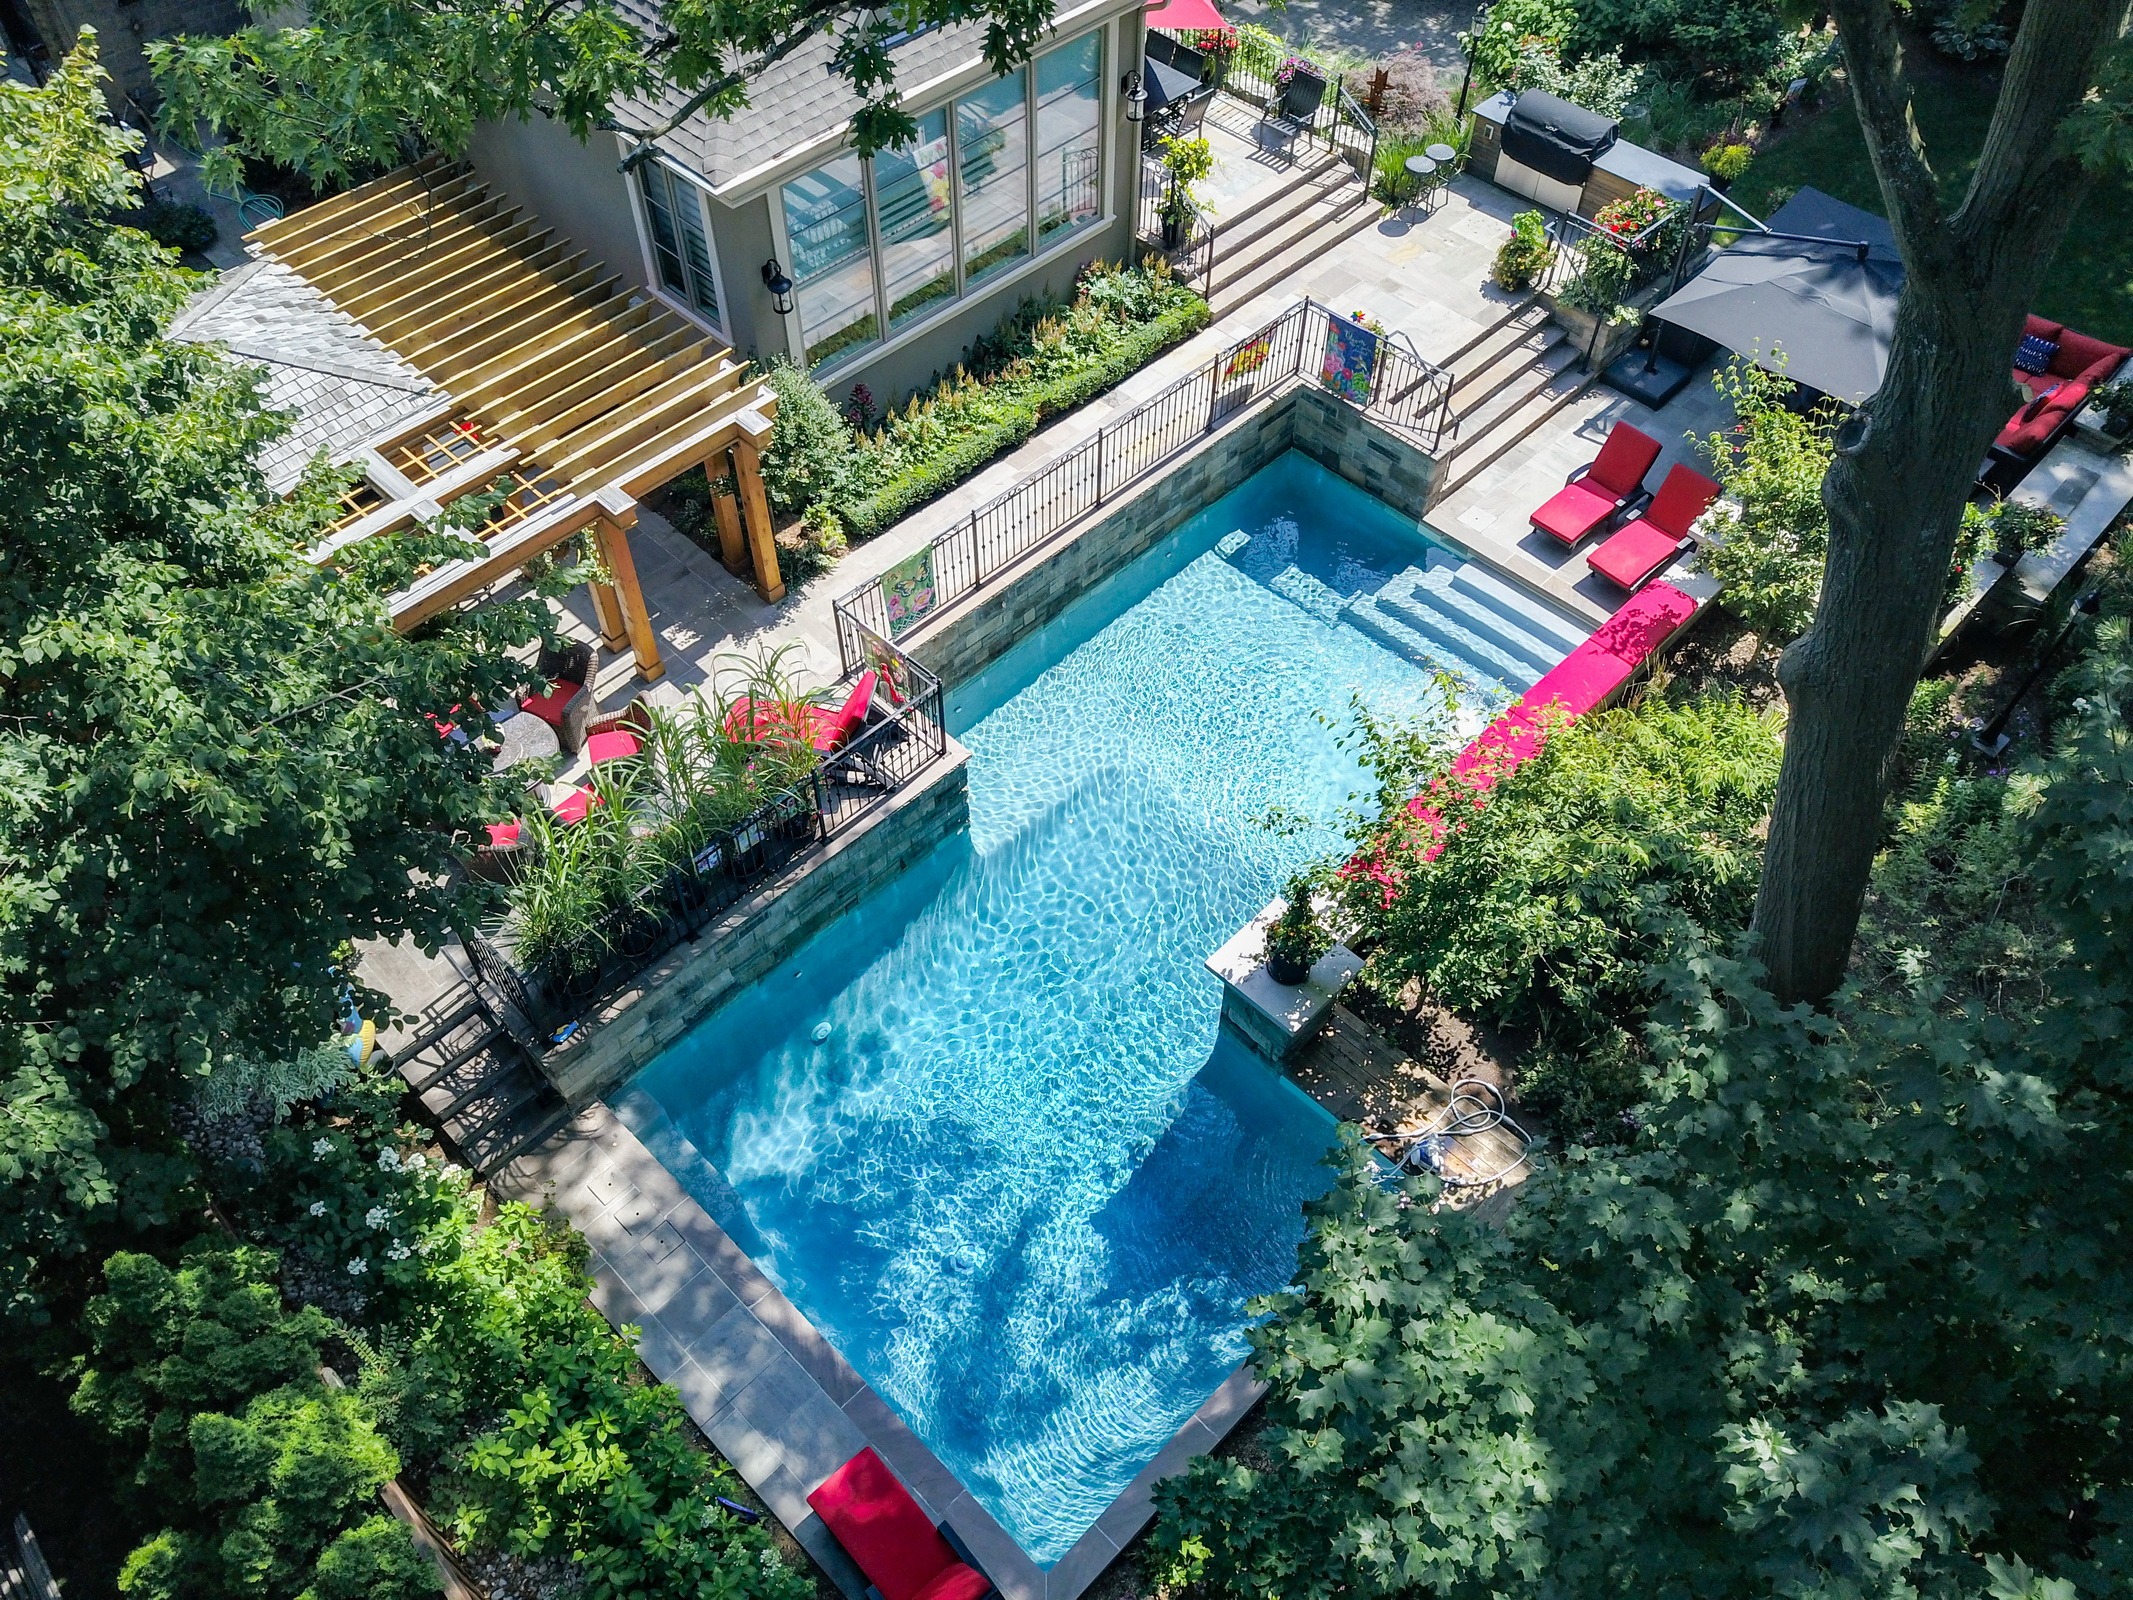 Aerial view of a backyard with a rectangular pool, surrounded by lush greenery, patio furniture, and a pergola next to a house.